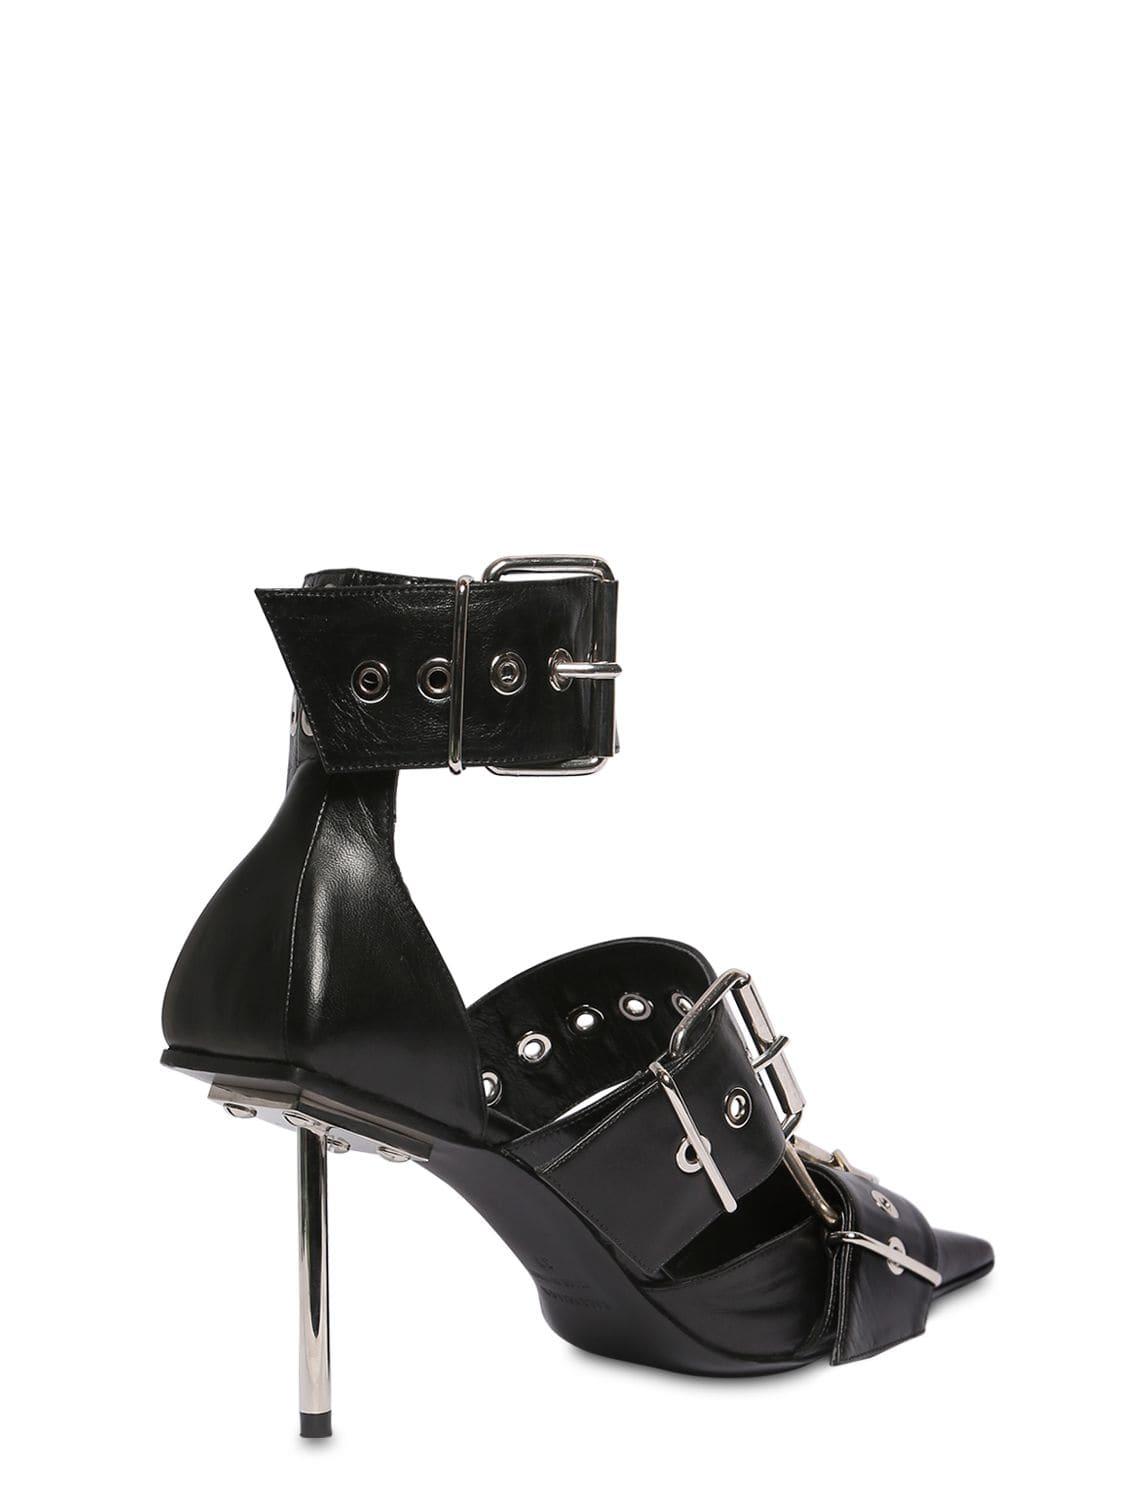 Balenciaga Leather Point-toe Buckle Pumps in Black - Lyst